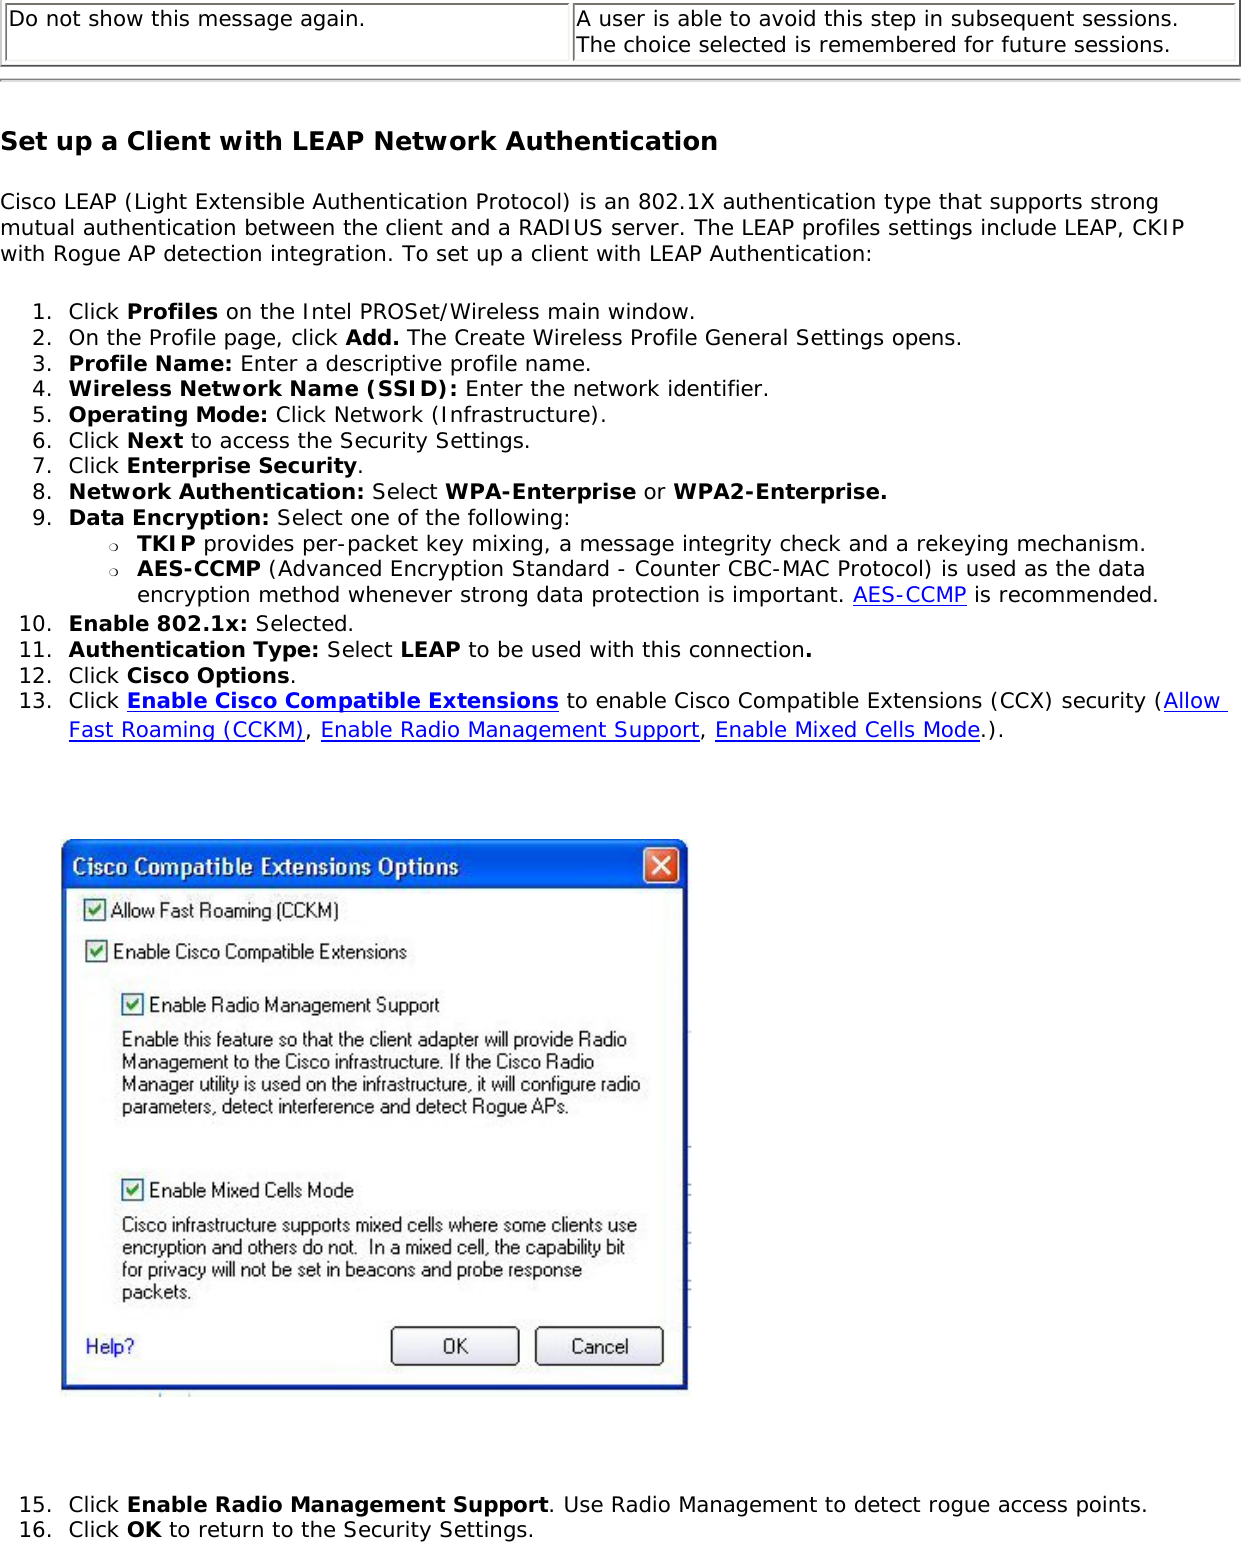 Do not show this message again.  A user is able to avoid this step in subsequent sessions. The choice selected is remembered for future sessions. Set up a Client with LEAP Network Authentication Cisco LEAP (Light Extensible Authentication Protocol) is an 802.1X authentication type that supports strong mutual authentication between the client and a RADIUS server. The LEAP profiles settings include LEAP, CKIP with Rogue AP detection integration. To set up a client with LEAP Authentication: 1.  Click Profiles on the Intel PROSet/Wireless main window. 2.  On the Profile page, click Add. The Create Wireless Profile General Settings opens.3.  Profile Name: Enter a descriptive profile name.4.  Wireless Network Name (SSID): Enter the network identifier. 5.  Operating Mode: Click Network (Infrastructure). 6.  Click Next to access the Security Settings.7.  Click Enterprise Security.8.  Network Authentication: Select WPA-Enterprise or WPA2-Enterprise. 9.  Data Encryption: Select one of the following: ❍     TKIP provides per-packet key mixing, a message integrity check and a rekeying mechanism.❍     AES-CCMP (Advanced Encryption Standard - Counter CBC-MAC Protocol) is used as the data encryption method whenever strong data protection is important. AES-CCMP is recommended.10.  Enable 802.1x: Selected.11.  Authentication Type: Select LEAP to be used with this connection. 12.  Click Cisco Options.13.  Click Enable Cisco Compatible Extensions to enable Cisco Compatible Extensions (CCX) security (Allow Fast Roaming (CCKM), Enable Radio Management Support, Enable Mixed Cells Mode.). 15.  Click Enable Radio Management Support. Use Radio Management to detect rogue access points. 16.  Click OK to return to the Security Settings. 